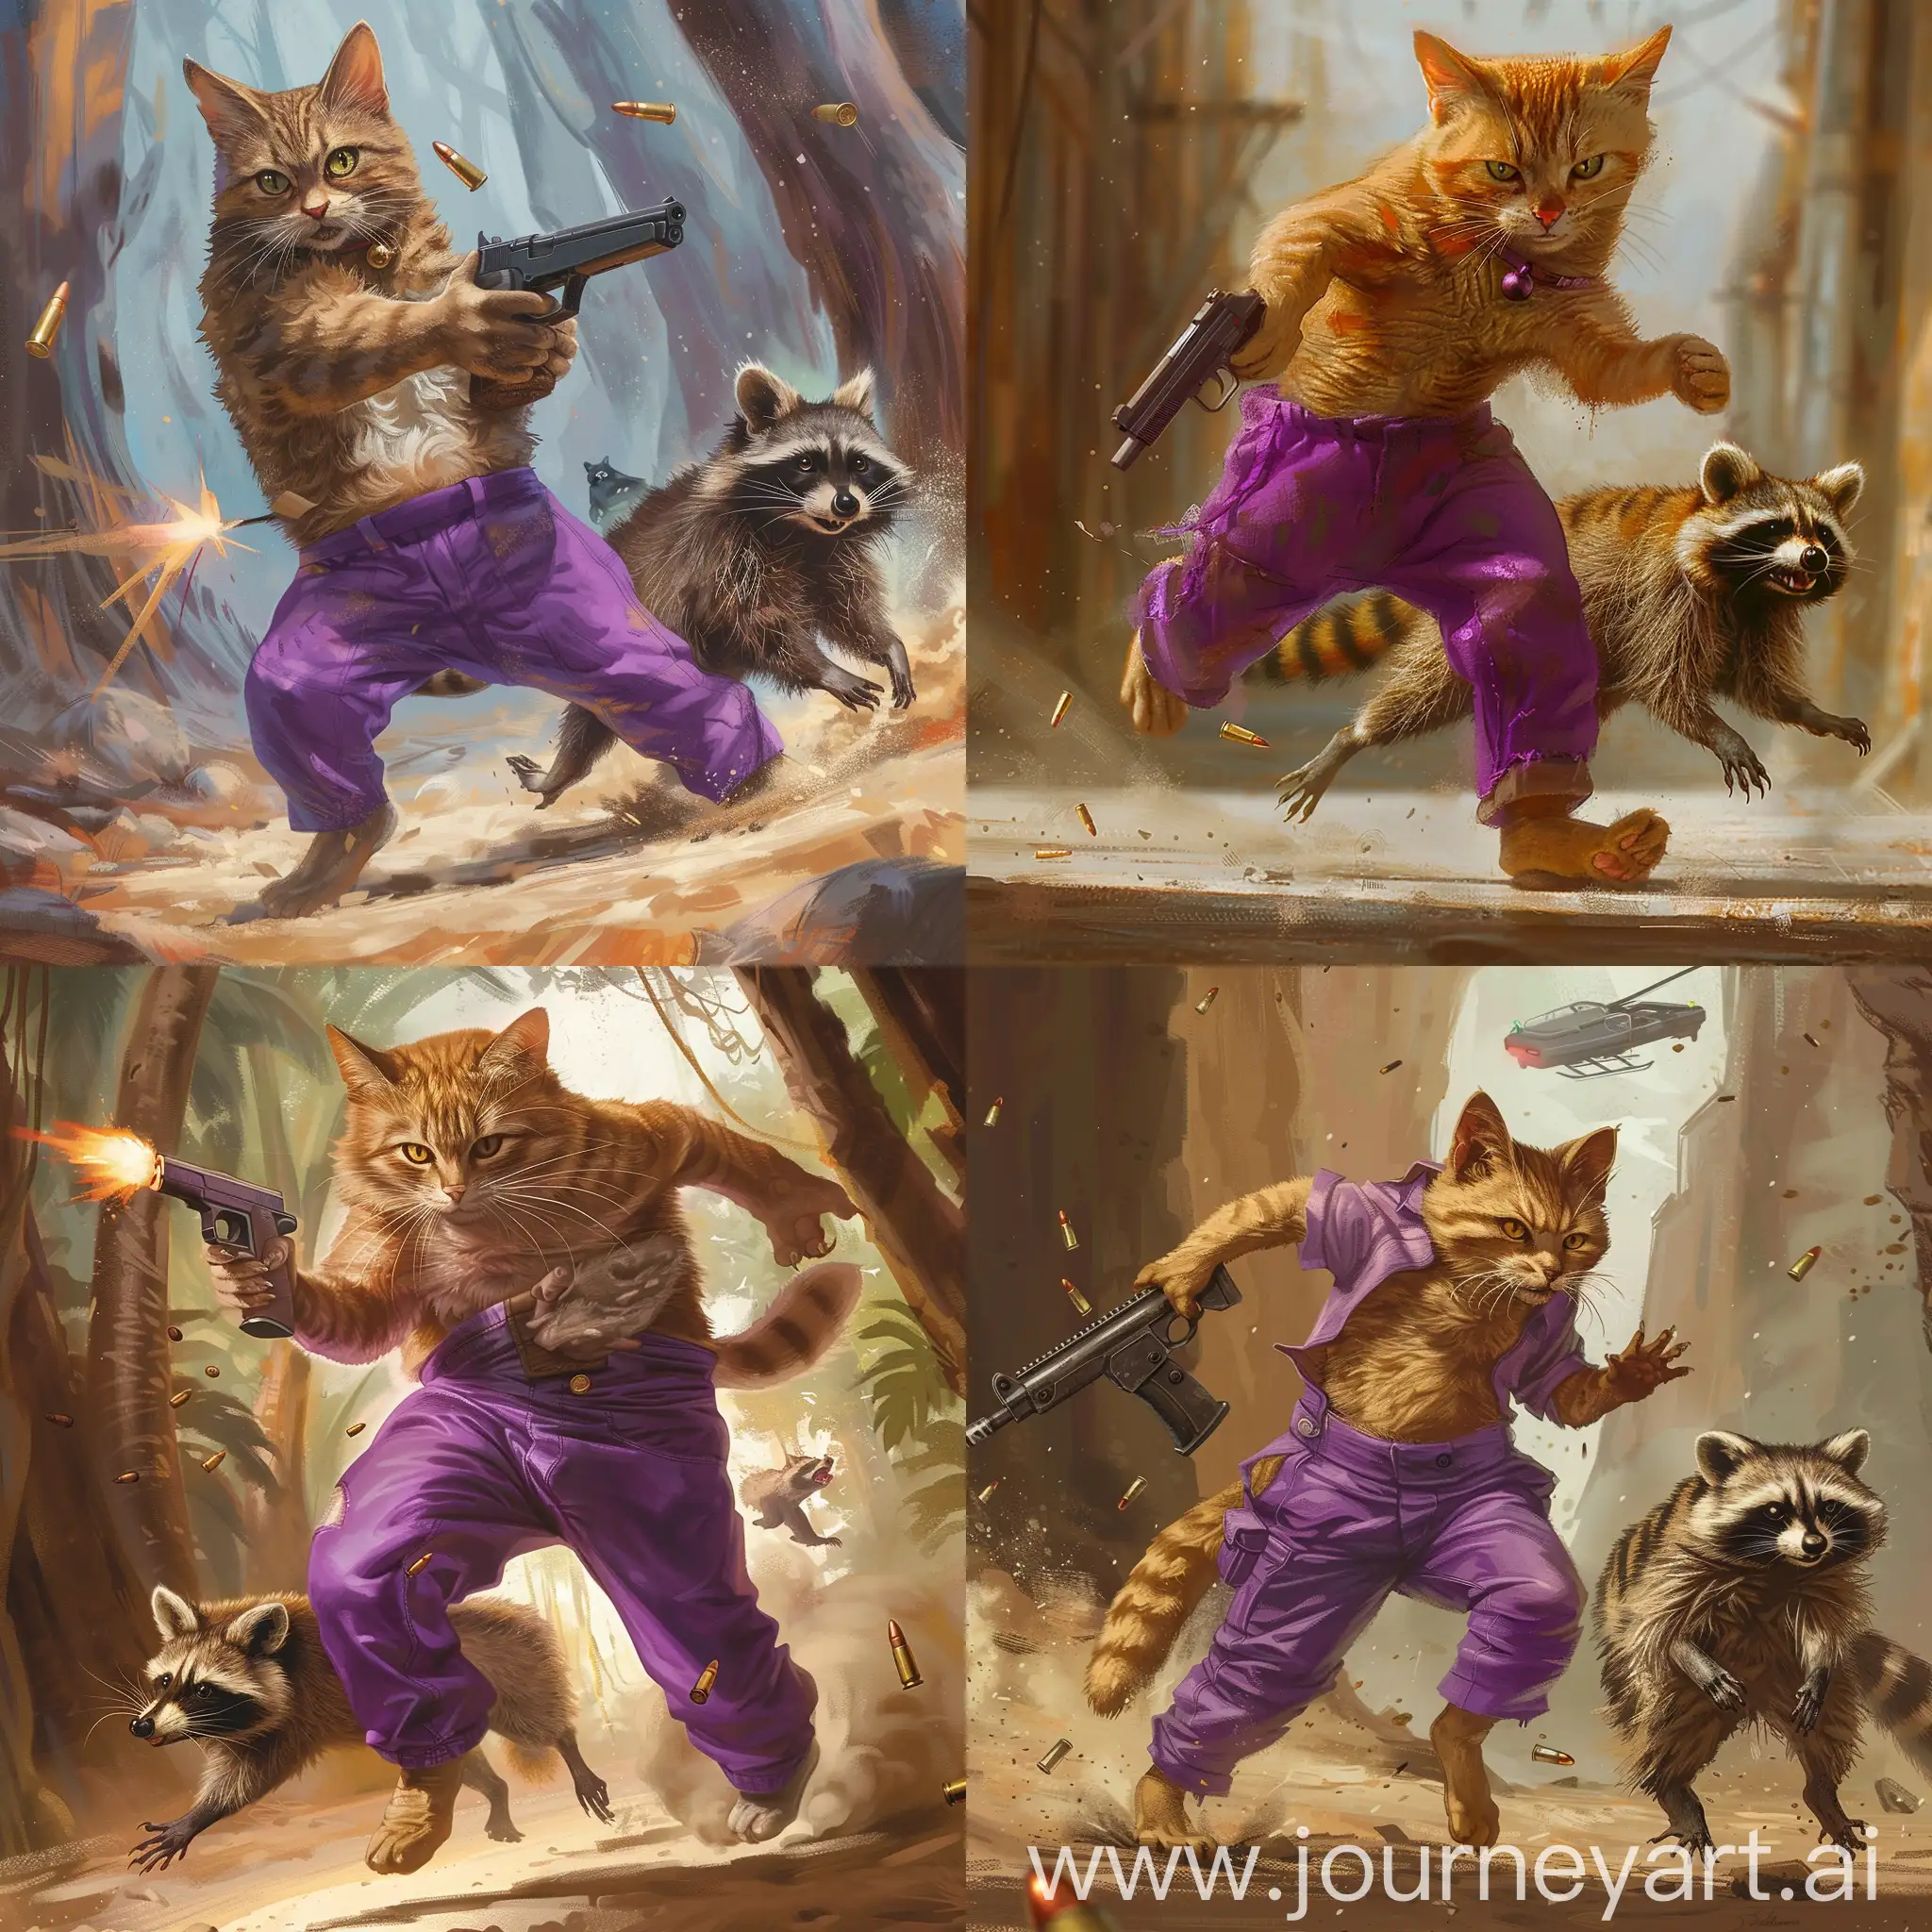 Cat-in-Purple-Pants-Chased-by-Raccoon-with-Gun